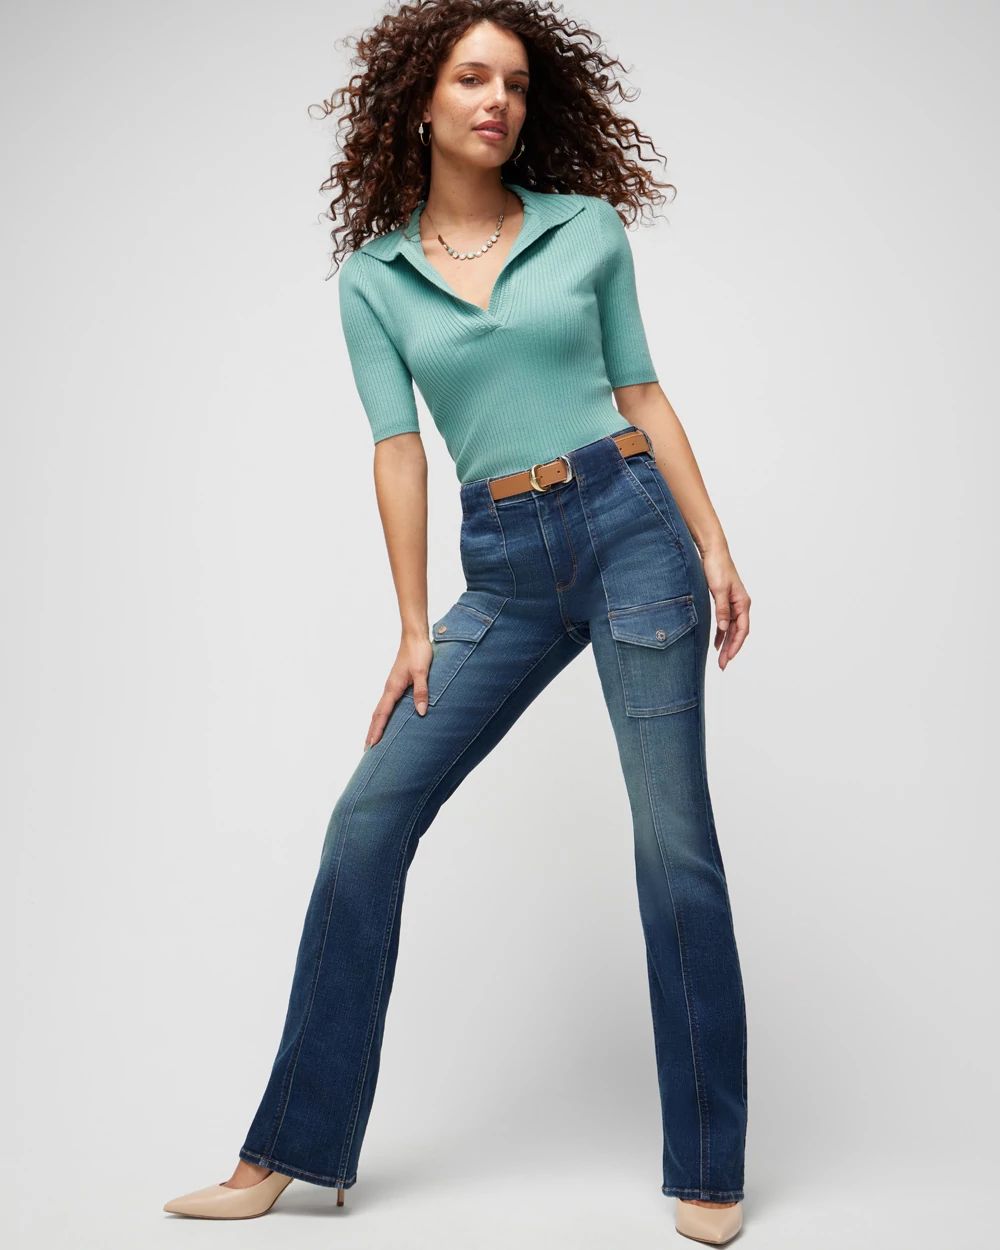 High-Rise Everyday Soft Denim  Cargo Skinny Flare Jeans click to view larger image.